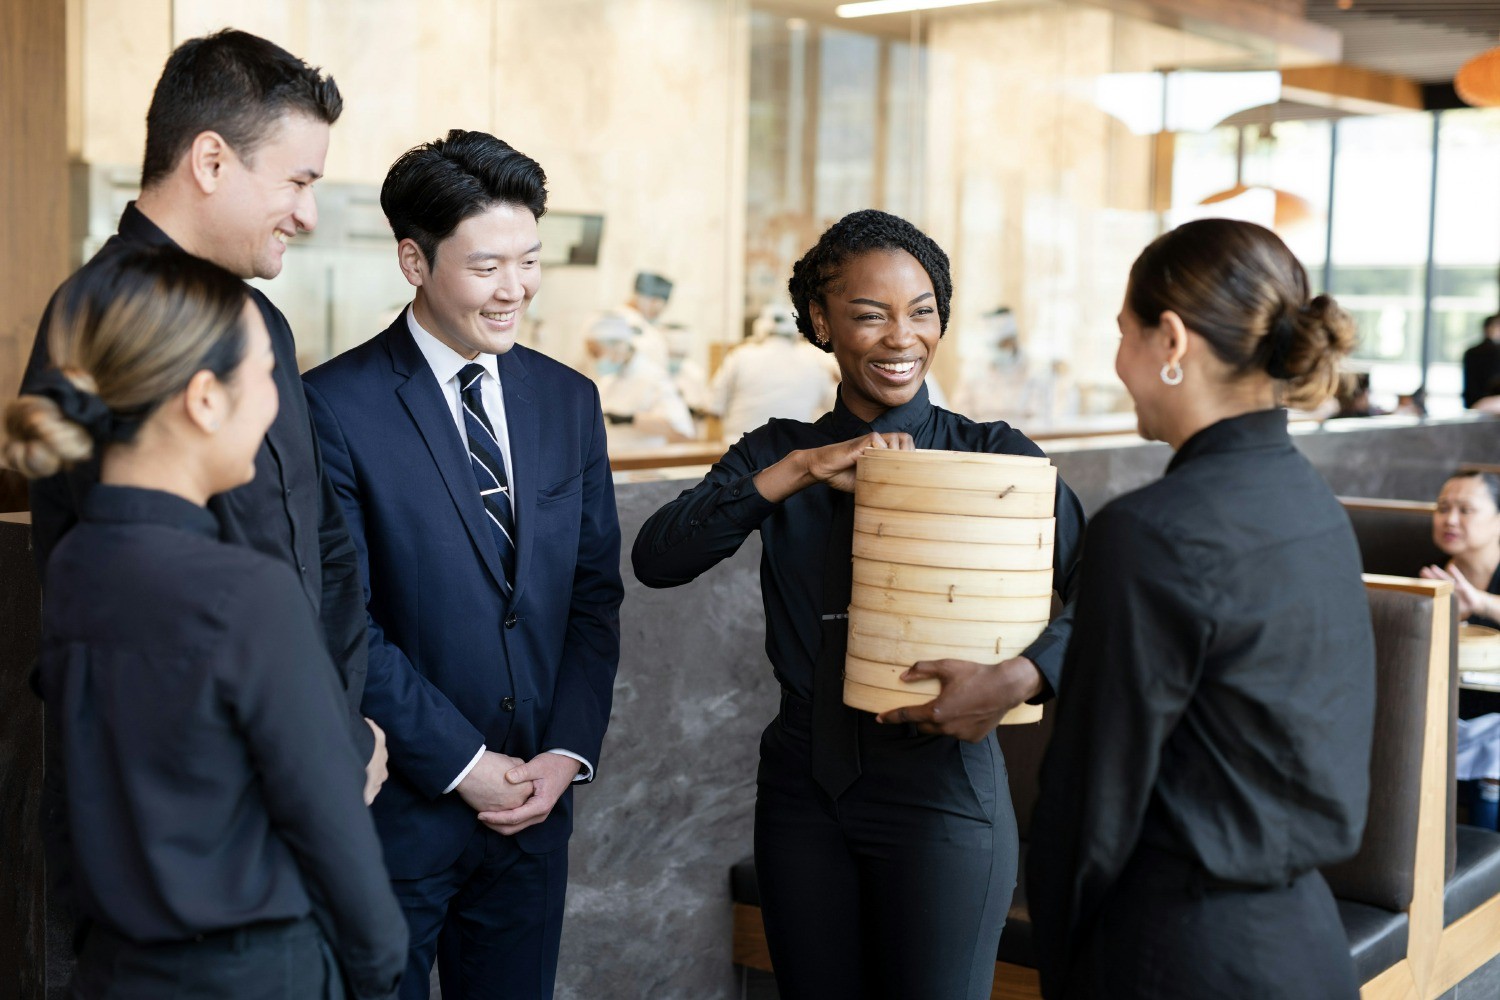 Din Tai Fung prioritizes learning and development to ensure team members have the skillsets necessary to be successful. 